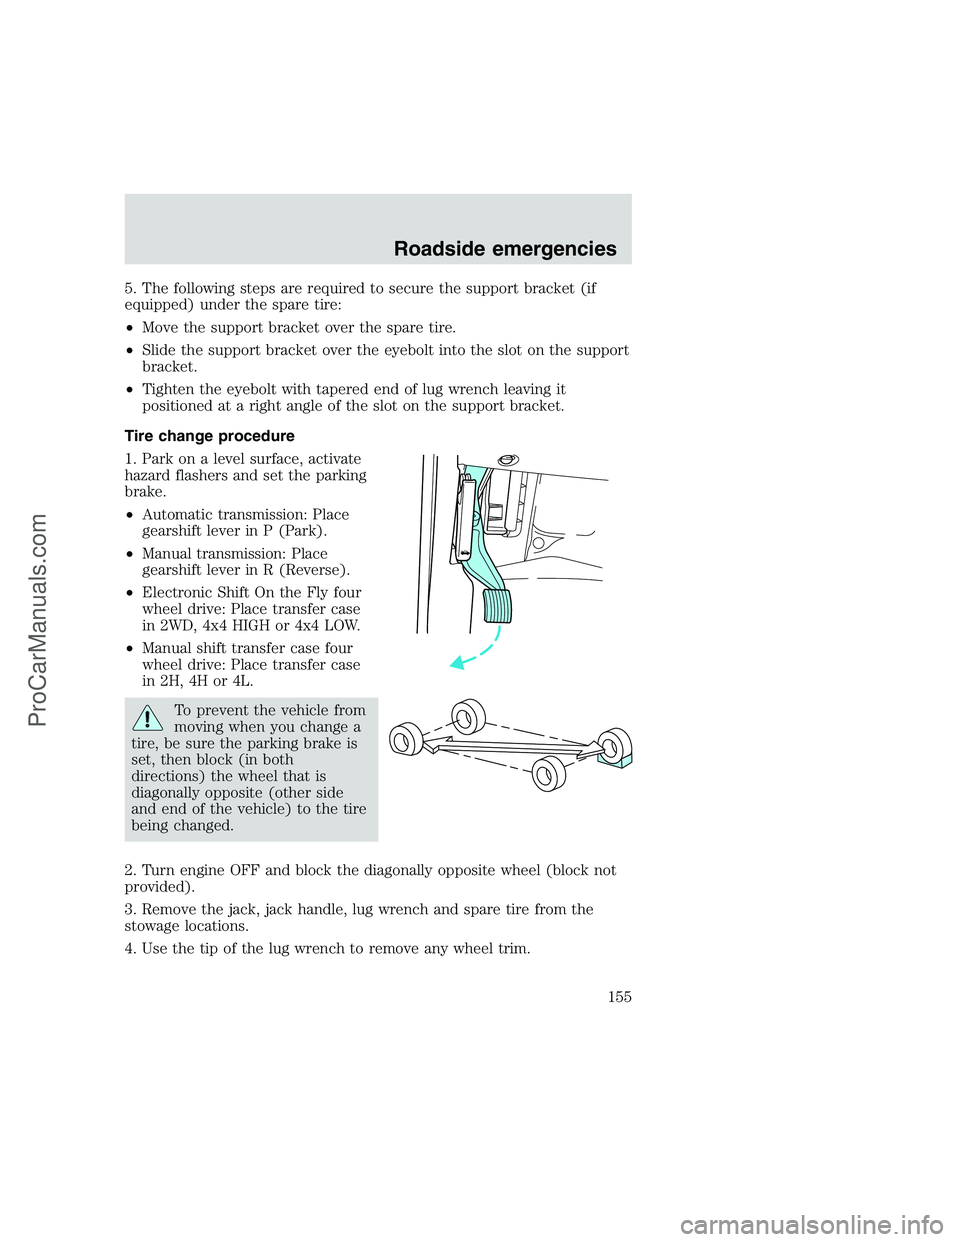 FORD F250 1999  Owners Manual 5. The following steps are required to secure the support bracket (if
equipped) under the spare tire:
•Move the support bracket over the spare tire.
•Slide the support bracket over the eyebolt int